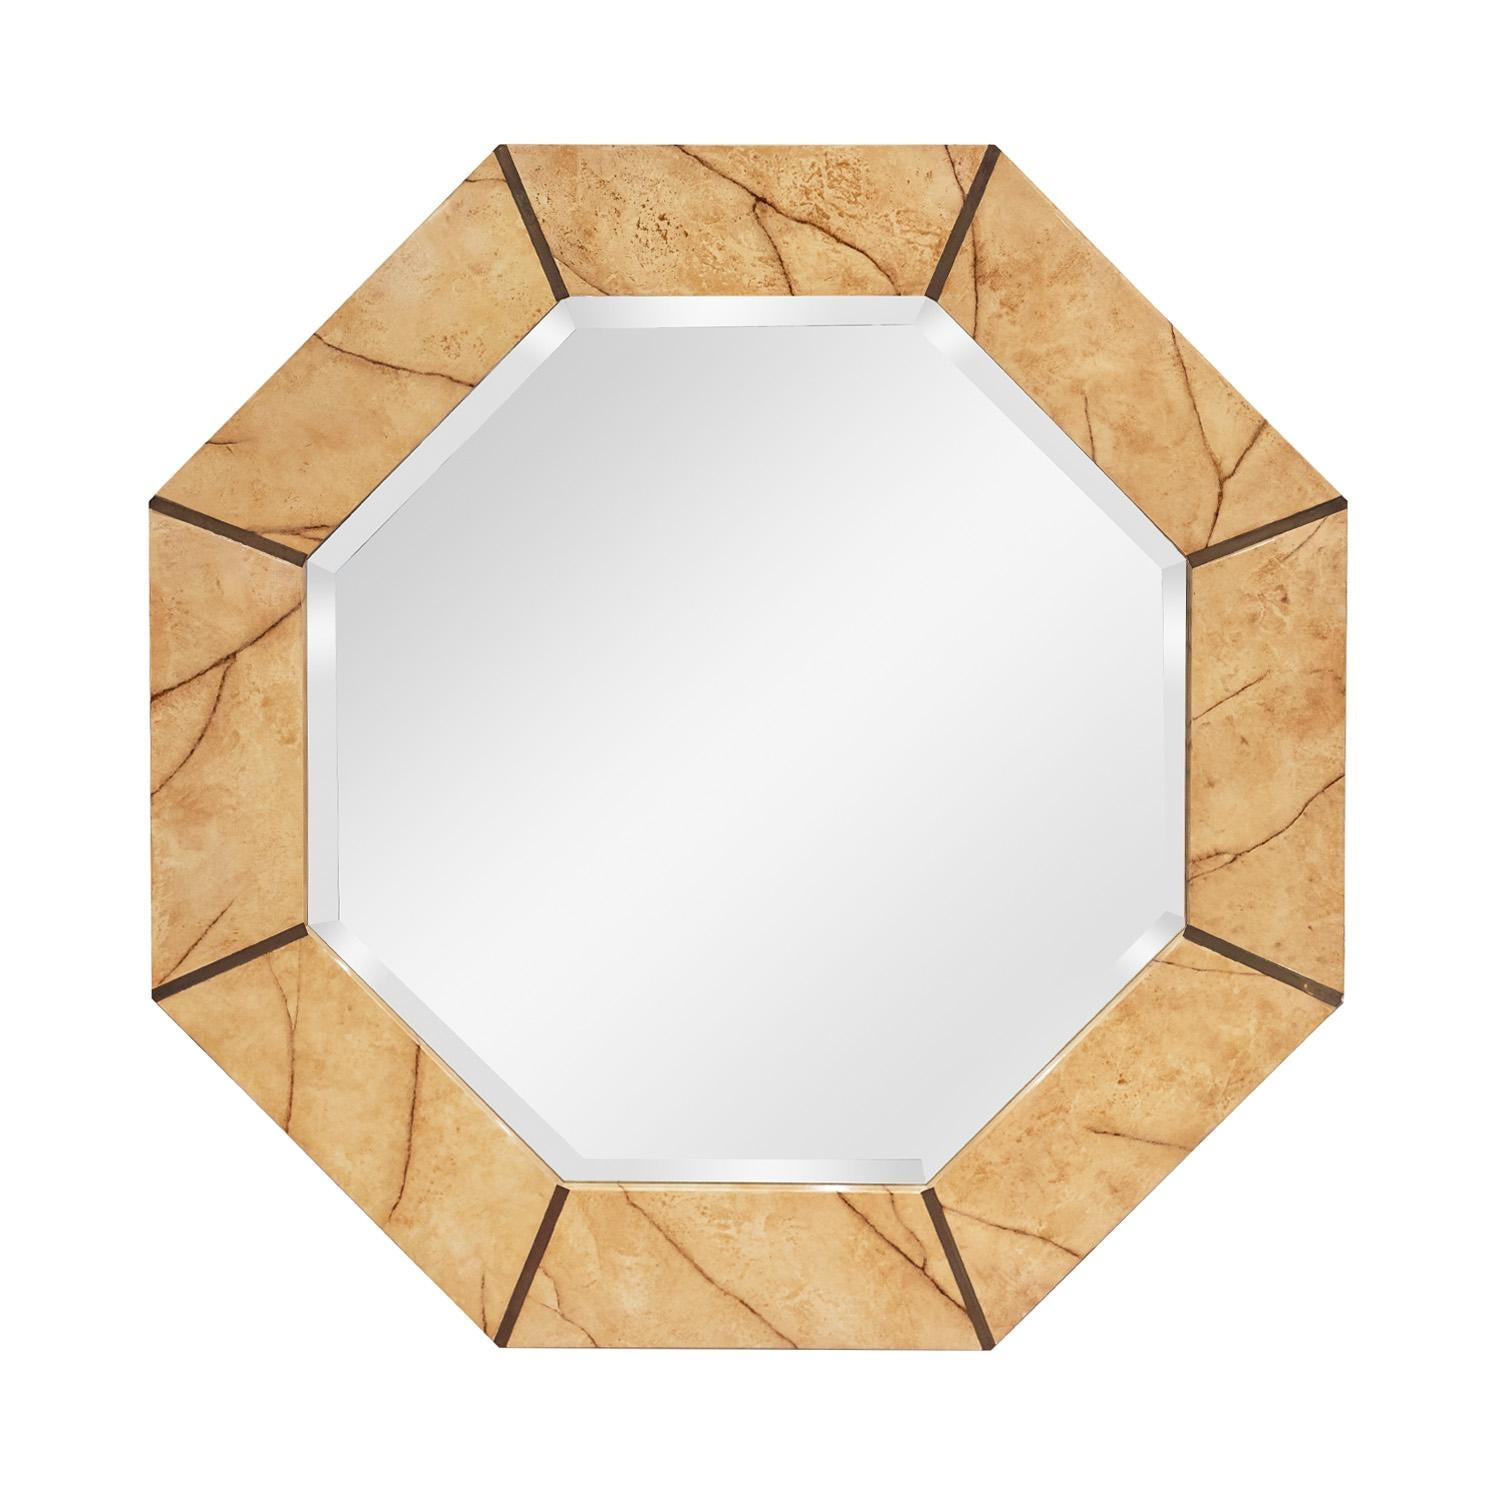 Octagonal wall hanging mirror in superb artisan marble lacquer with bronze accents and beveled mirror by Karl Springer, American 1980s. Springer worked with artists who could accomplish the most complex and realistic finishes. This lacquer work is